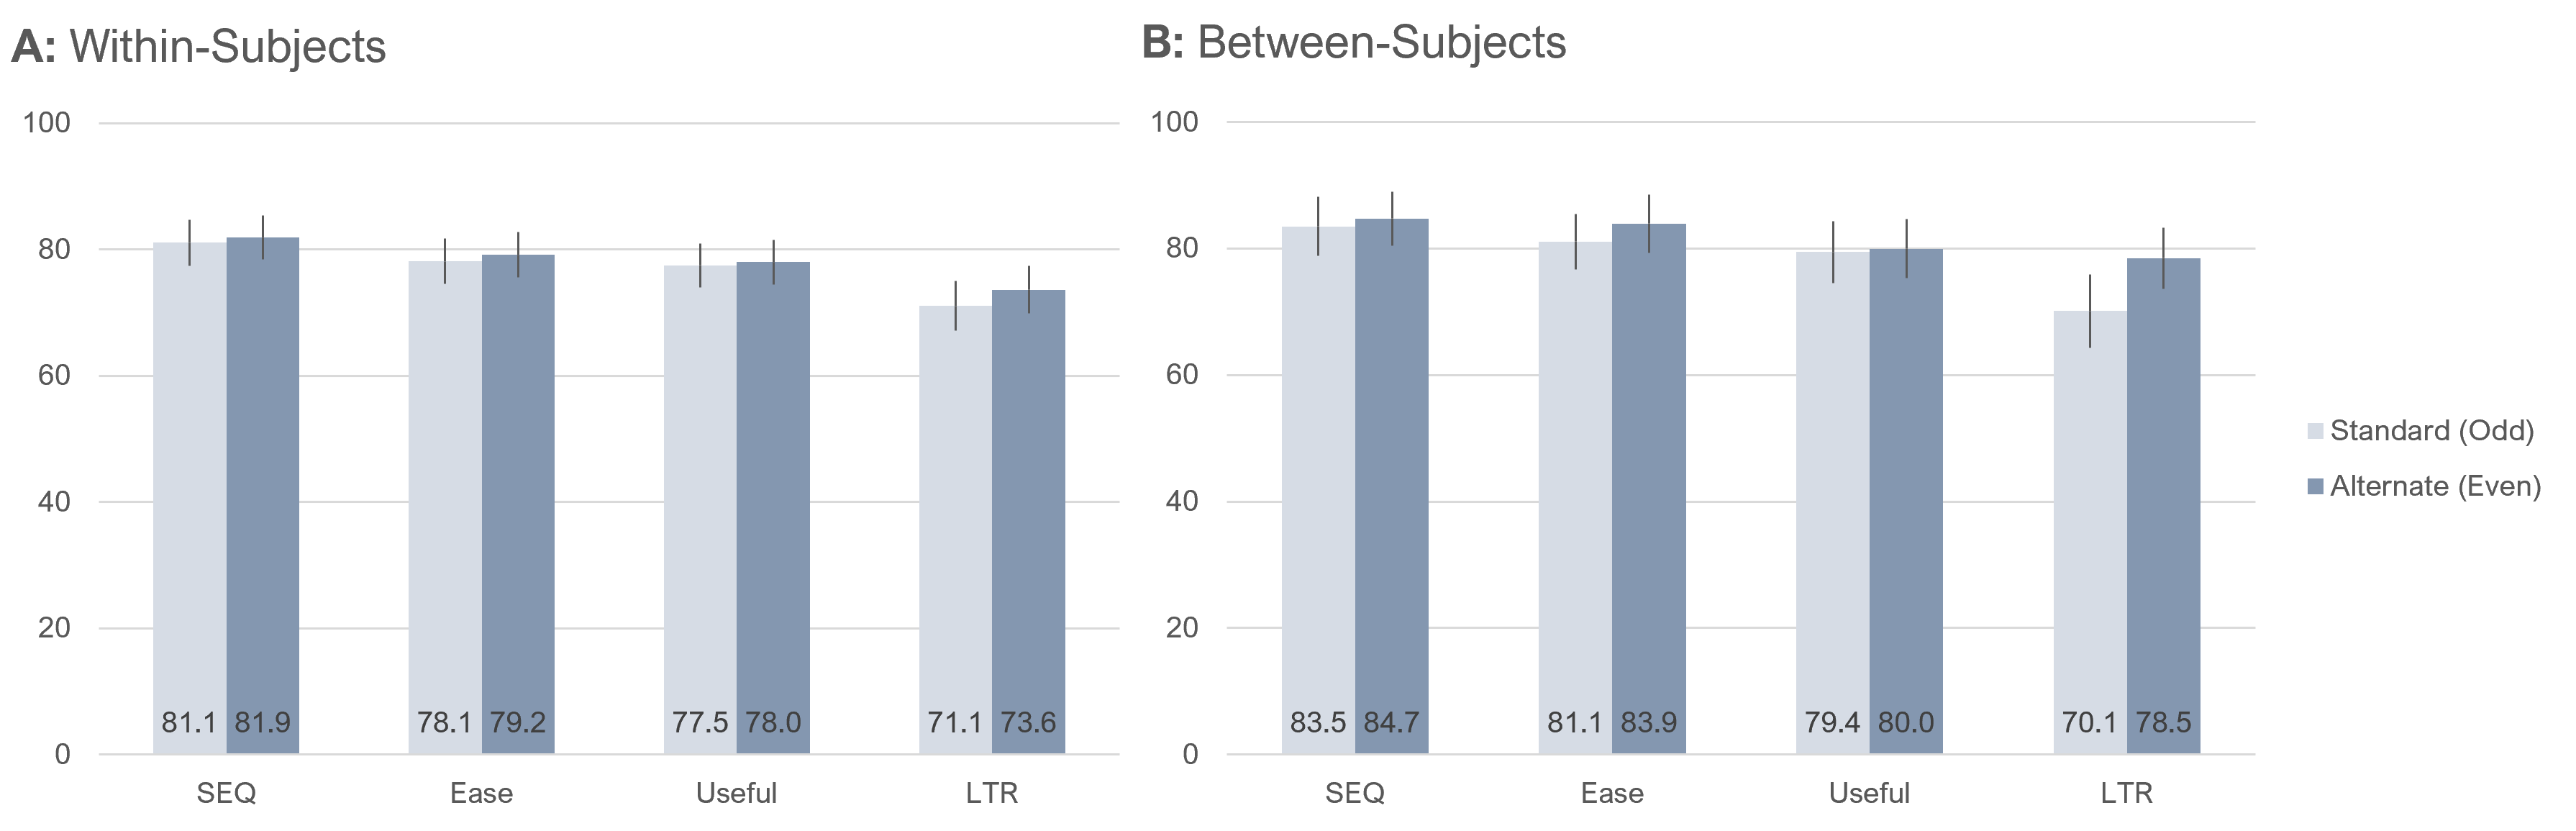  Overall within- and between-subjects differences in mean ratings as a function of item format (with 95% confidence intervals).